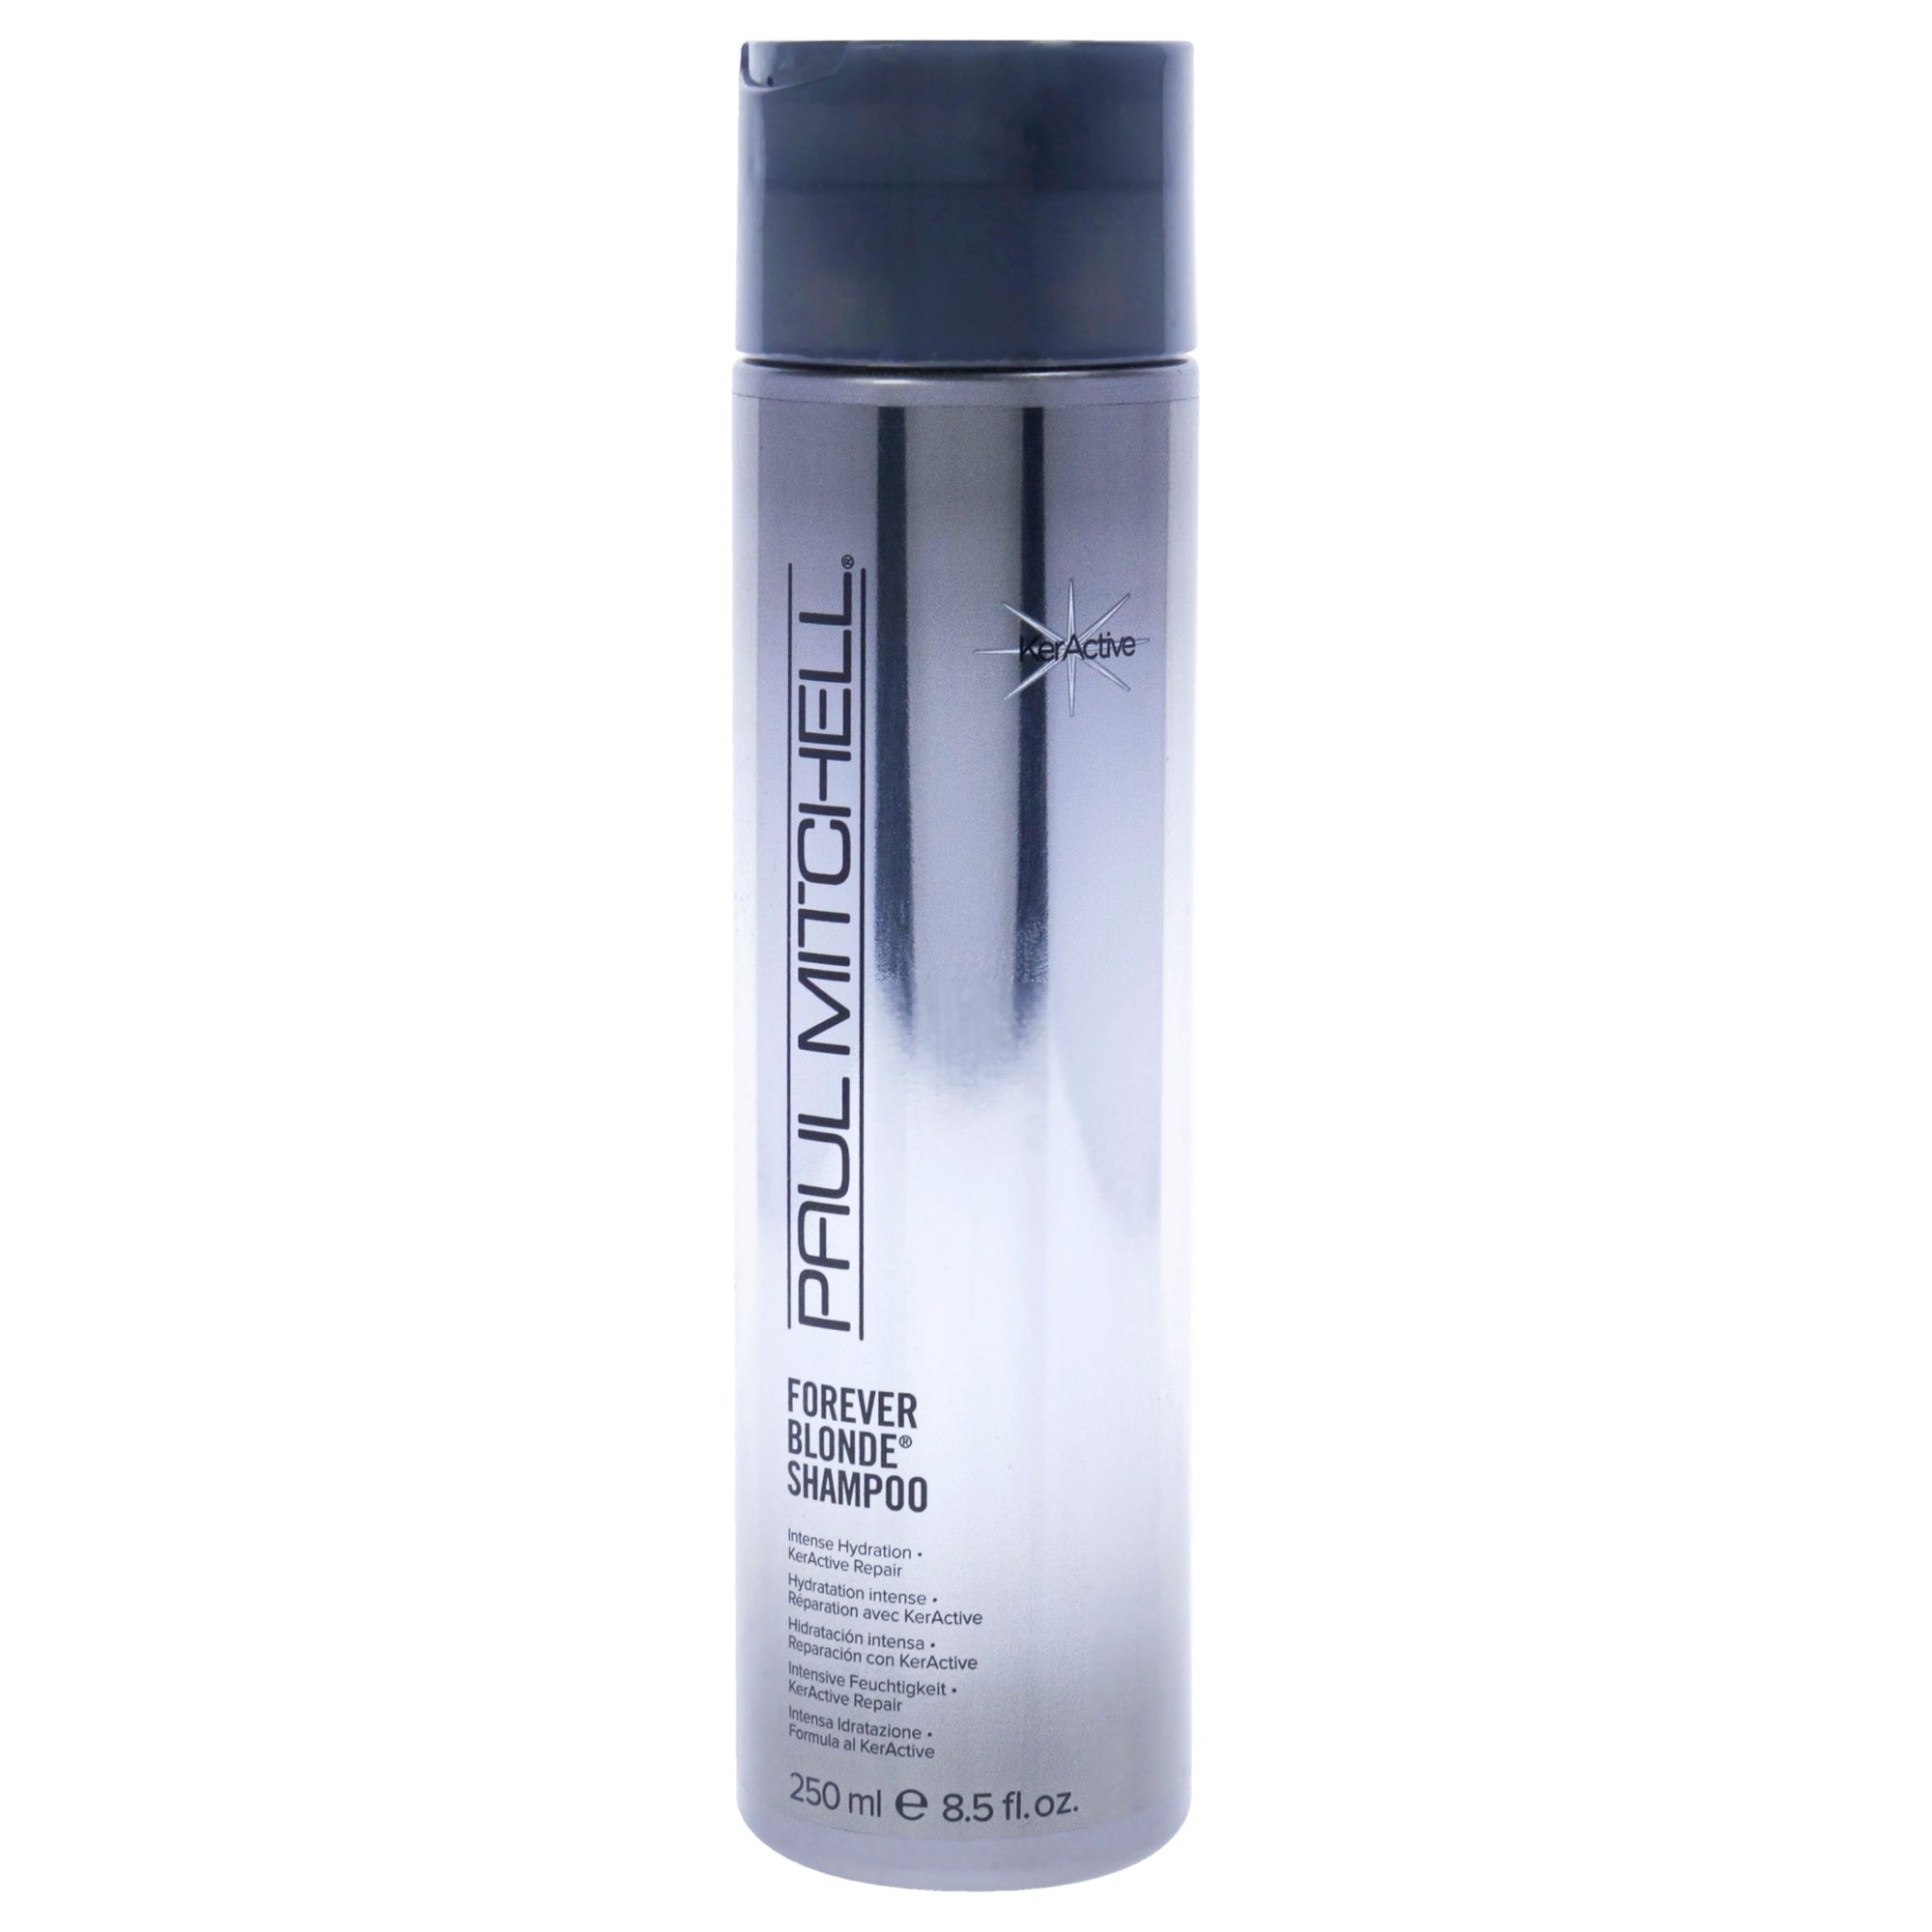 Forever Blonde Shampoo by Paul Mitchell for Unisex - 8.5 oz Shampoo